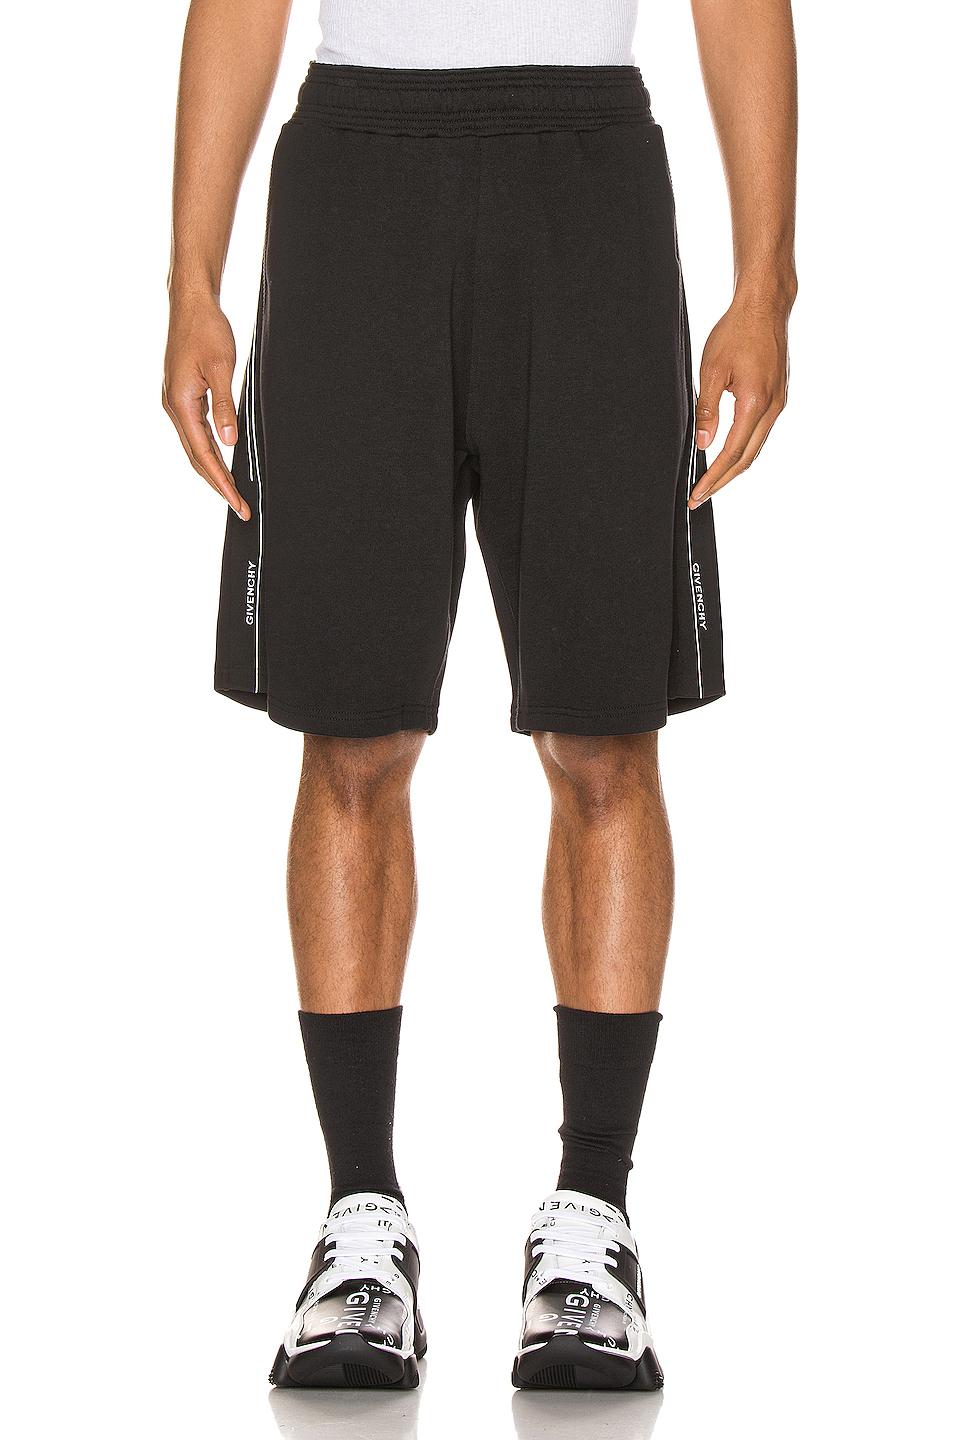 Givenchy Synthetic Shorts in Black for Men - Lyst